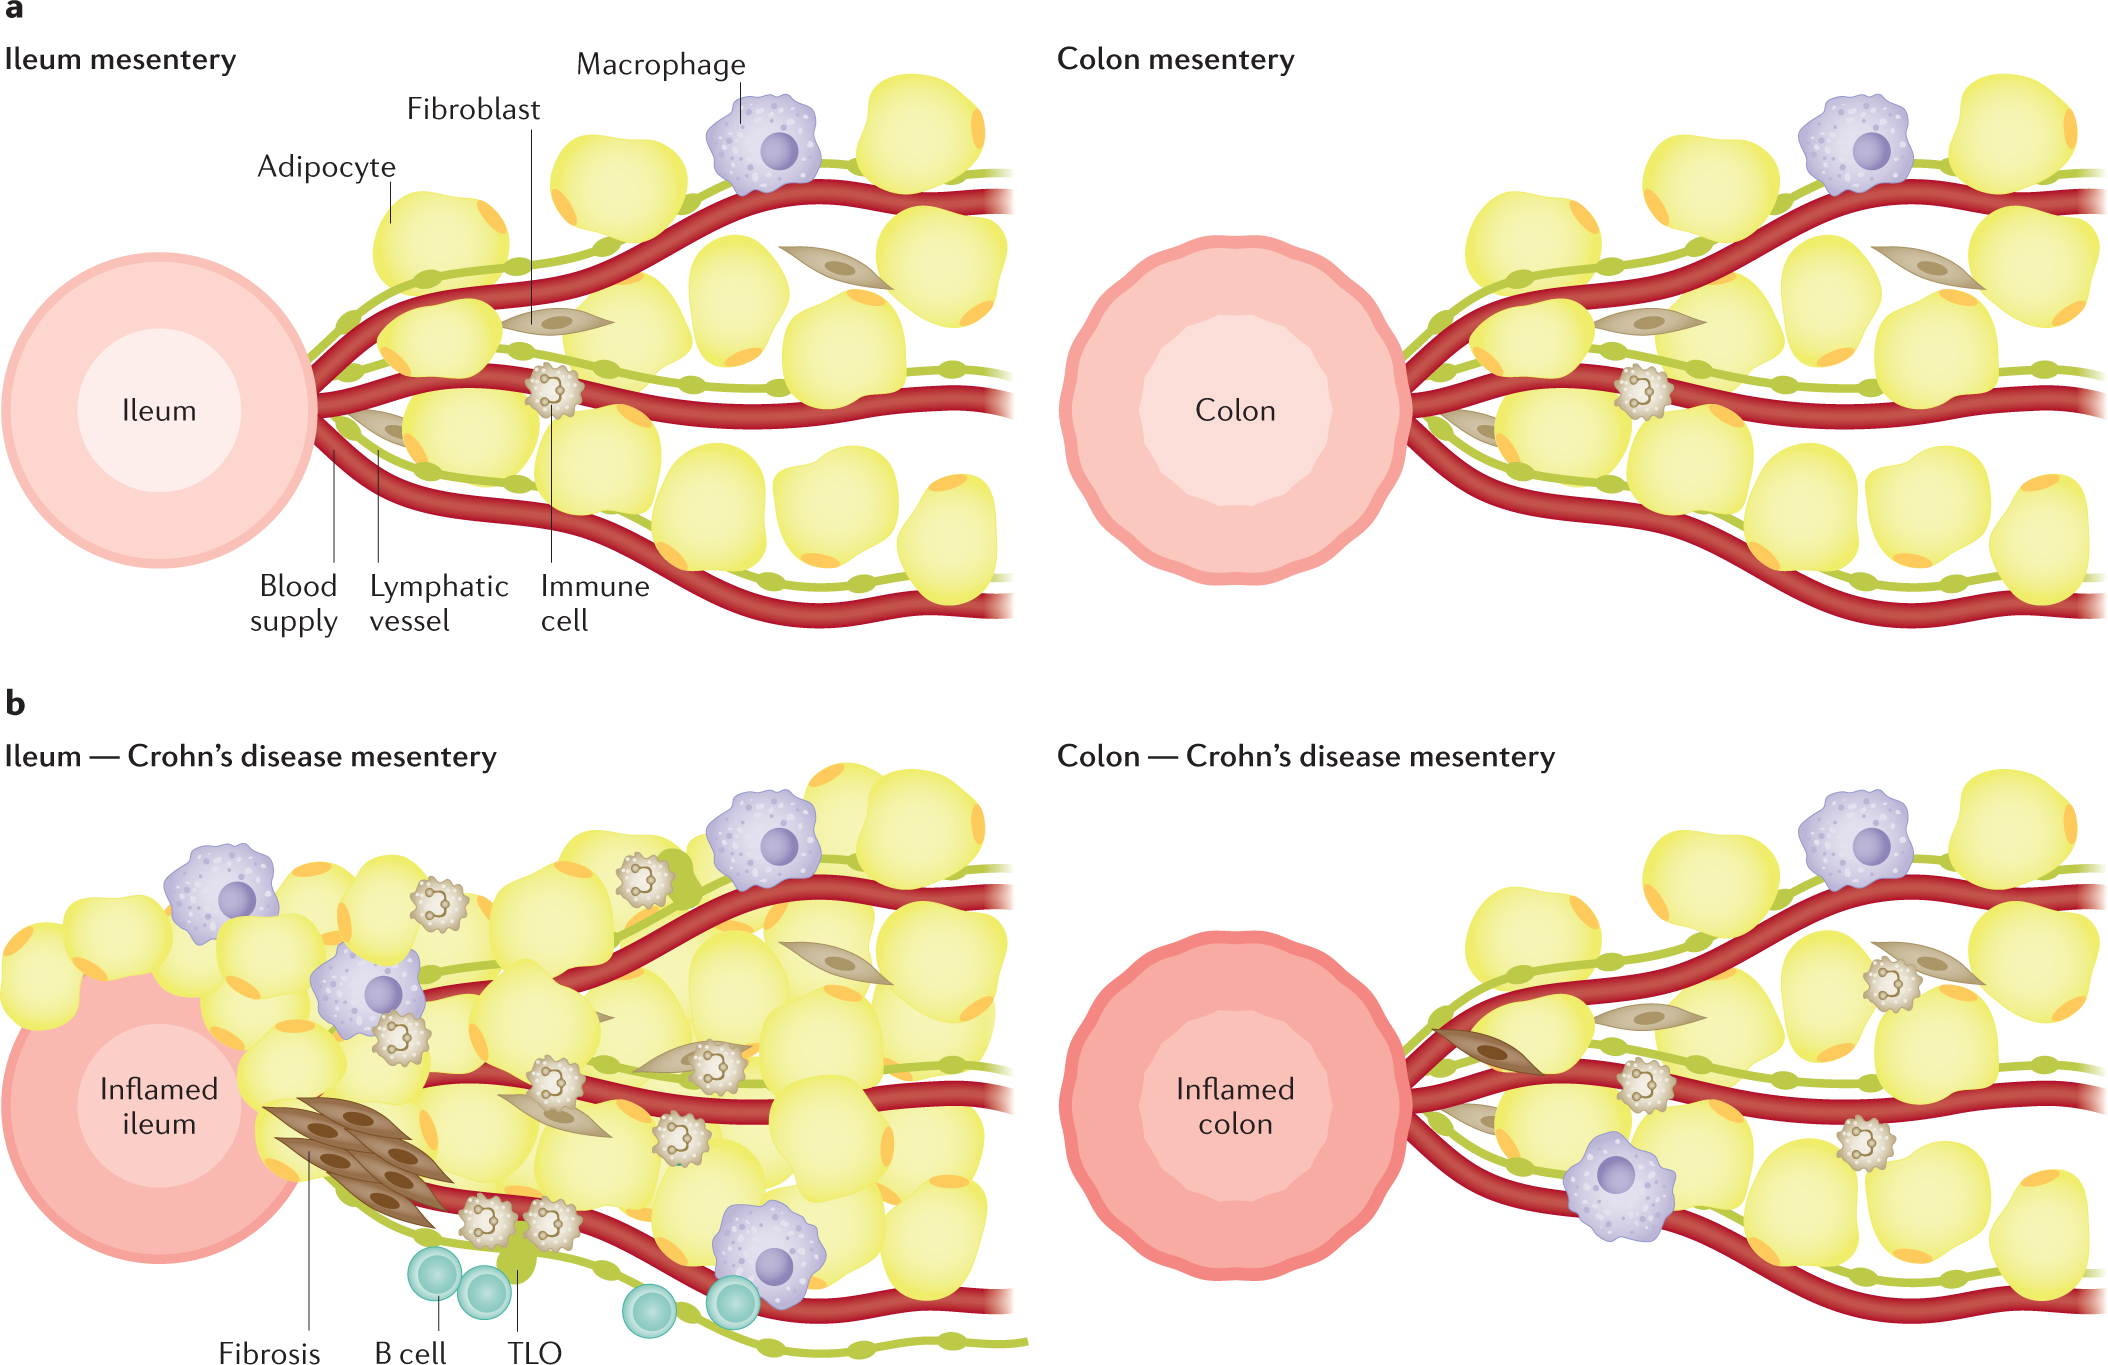 Location is important: differentiation between ileal and colonic Crohn's  disease